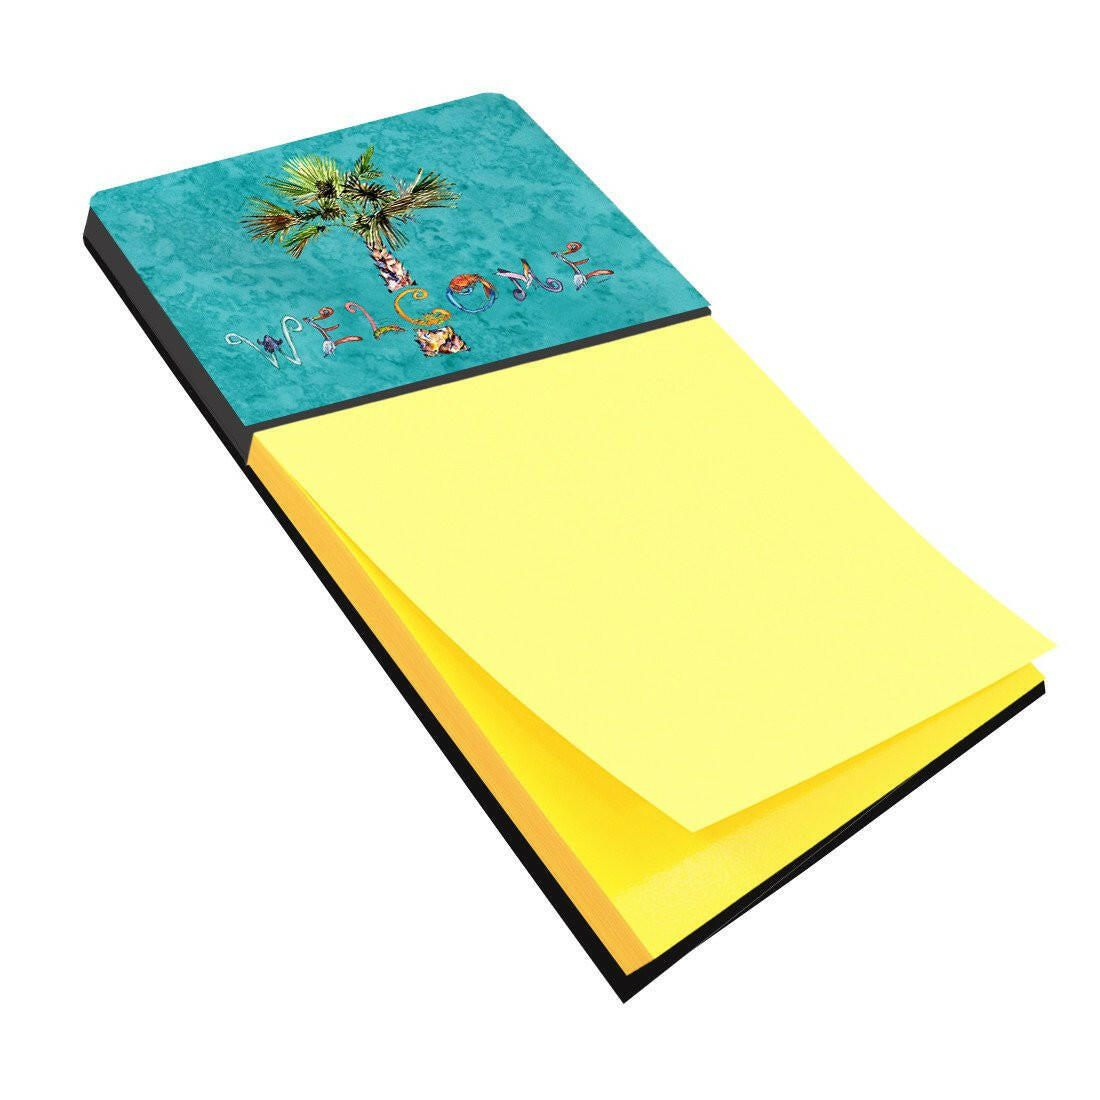 Welcome Palm Tree on Teal Sticky Note Holder 8711SN by Caroline's Treasures